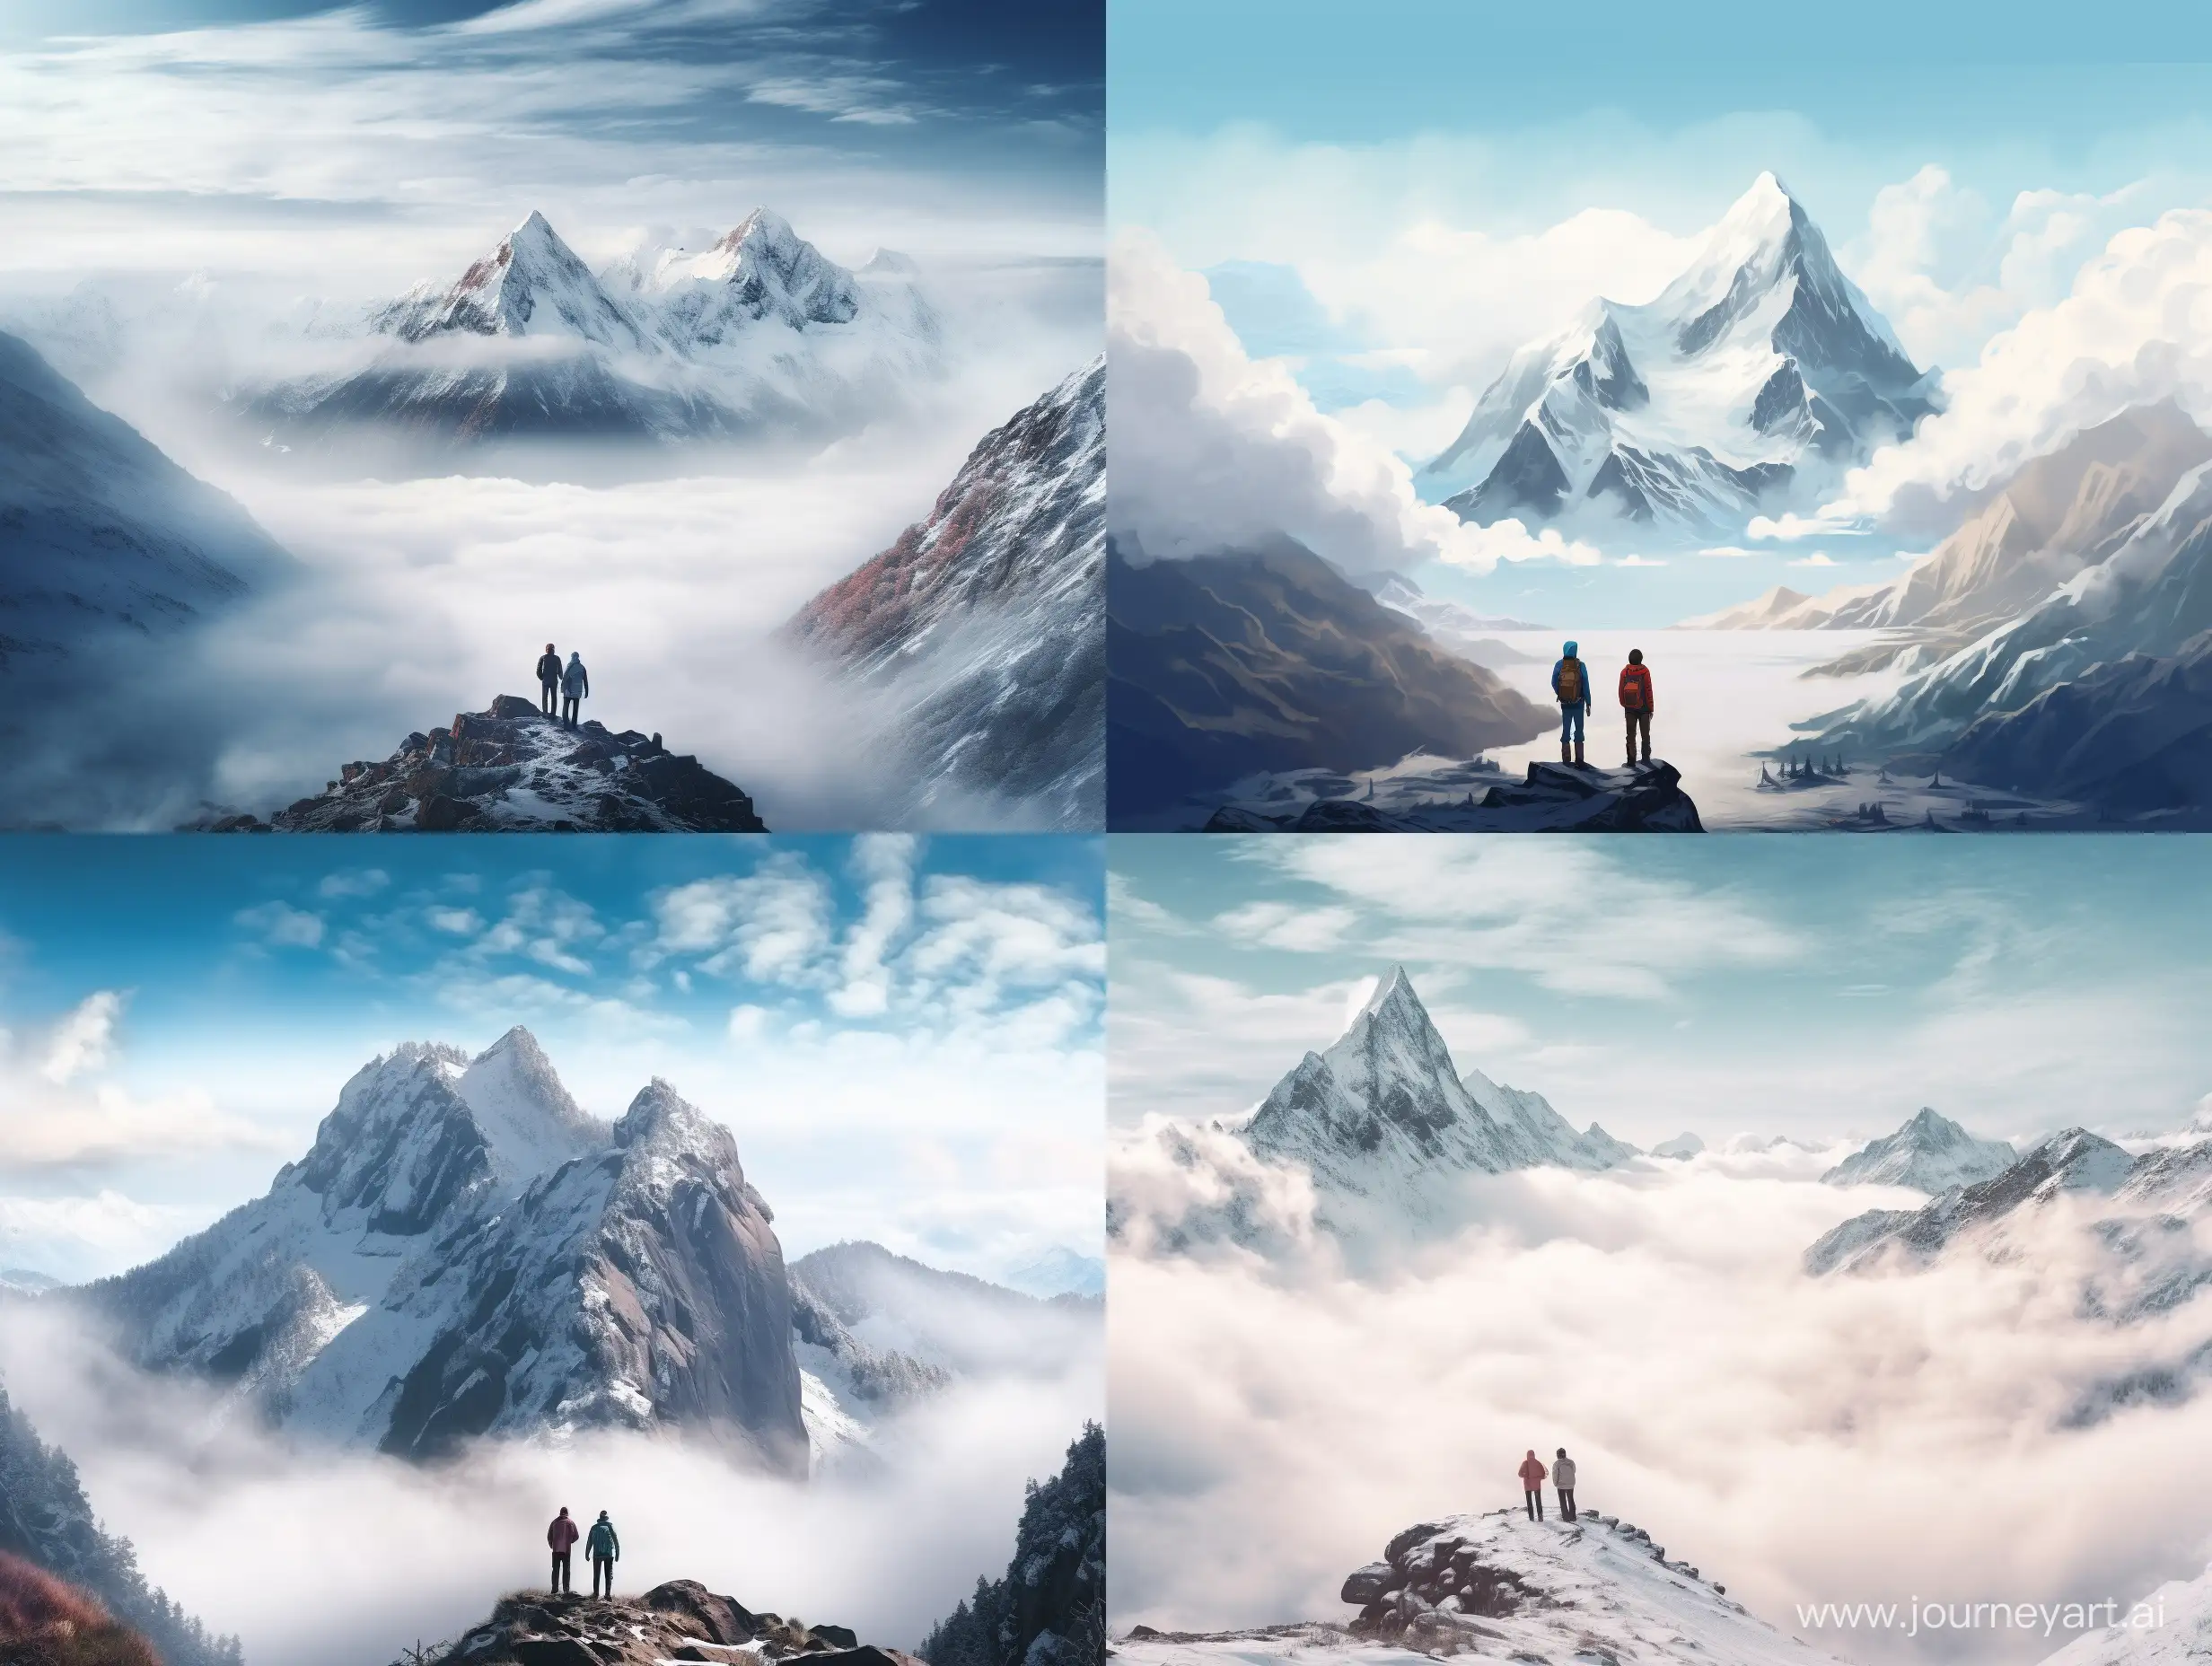 Fjords, snow, a valley, snowy forests, mountain peaks in the clouds, a little fog, two travellers standing in the distance and admiring the view